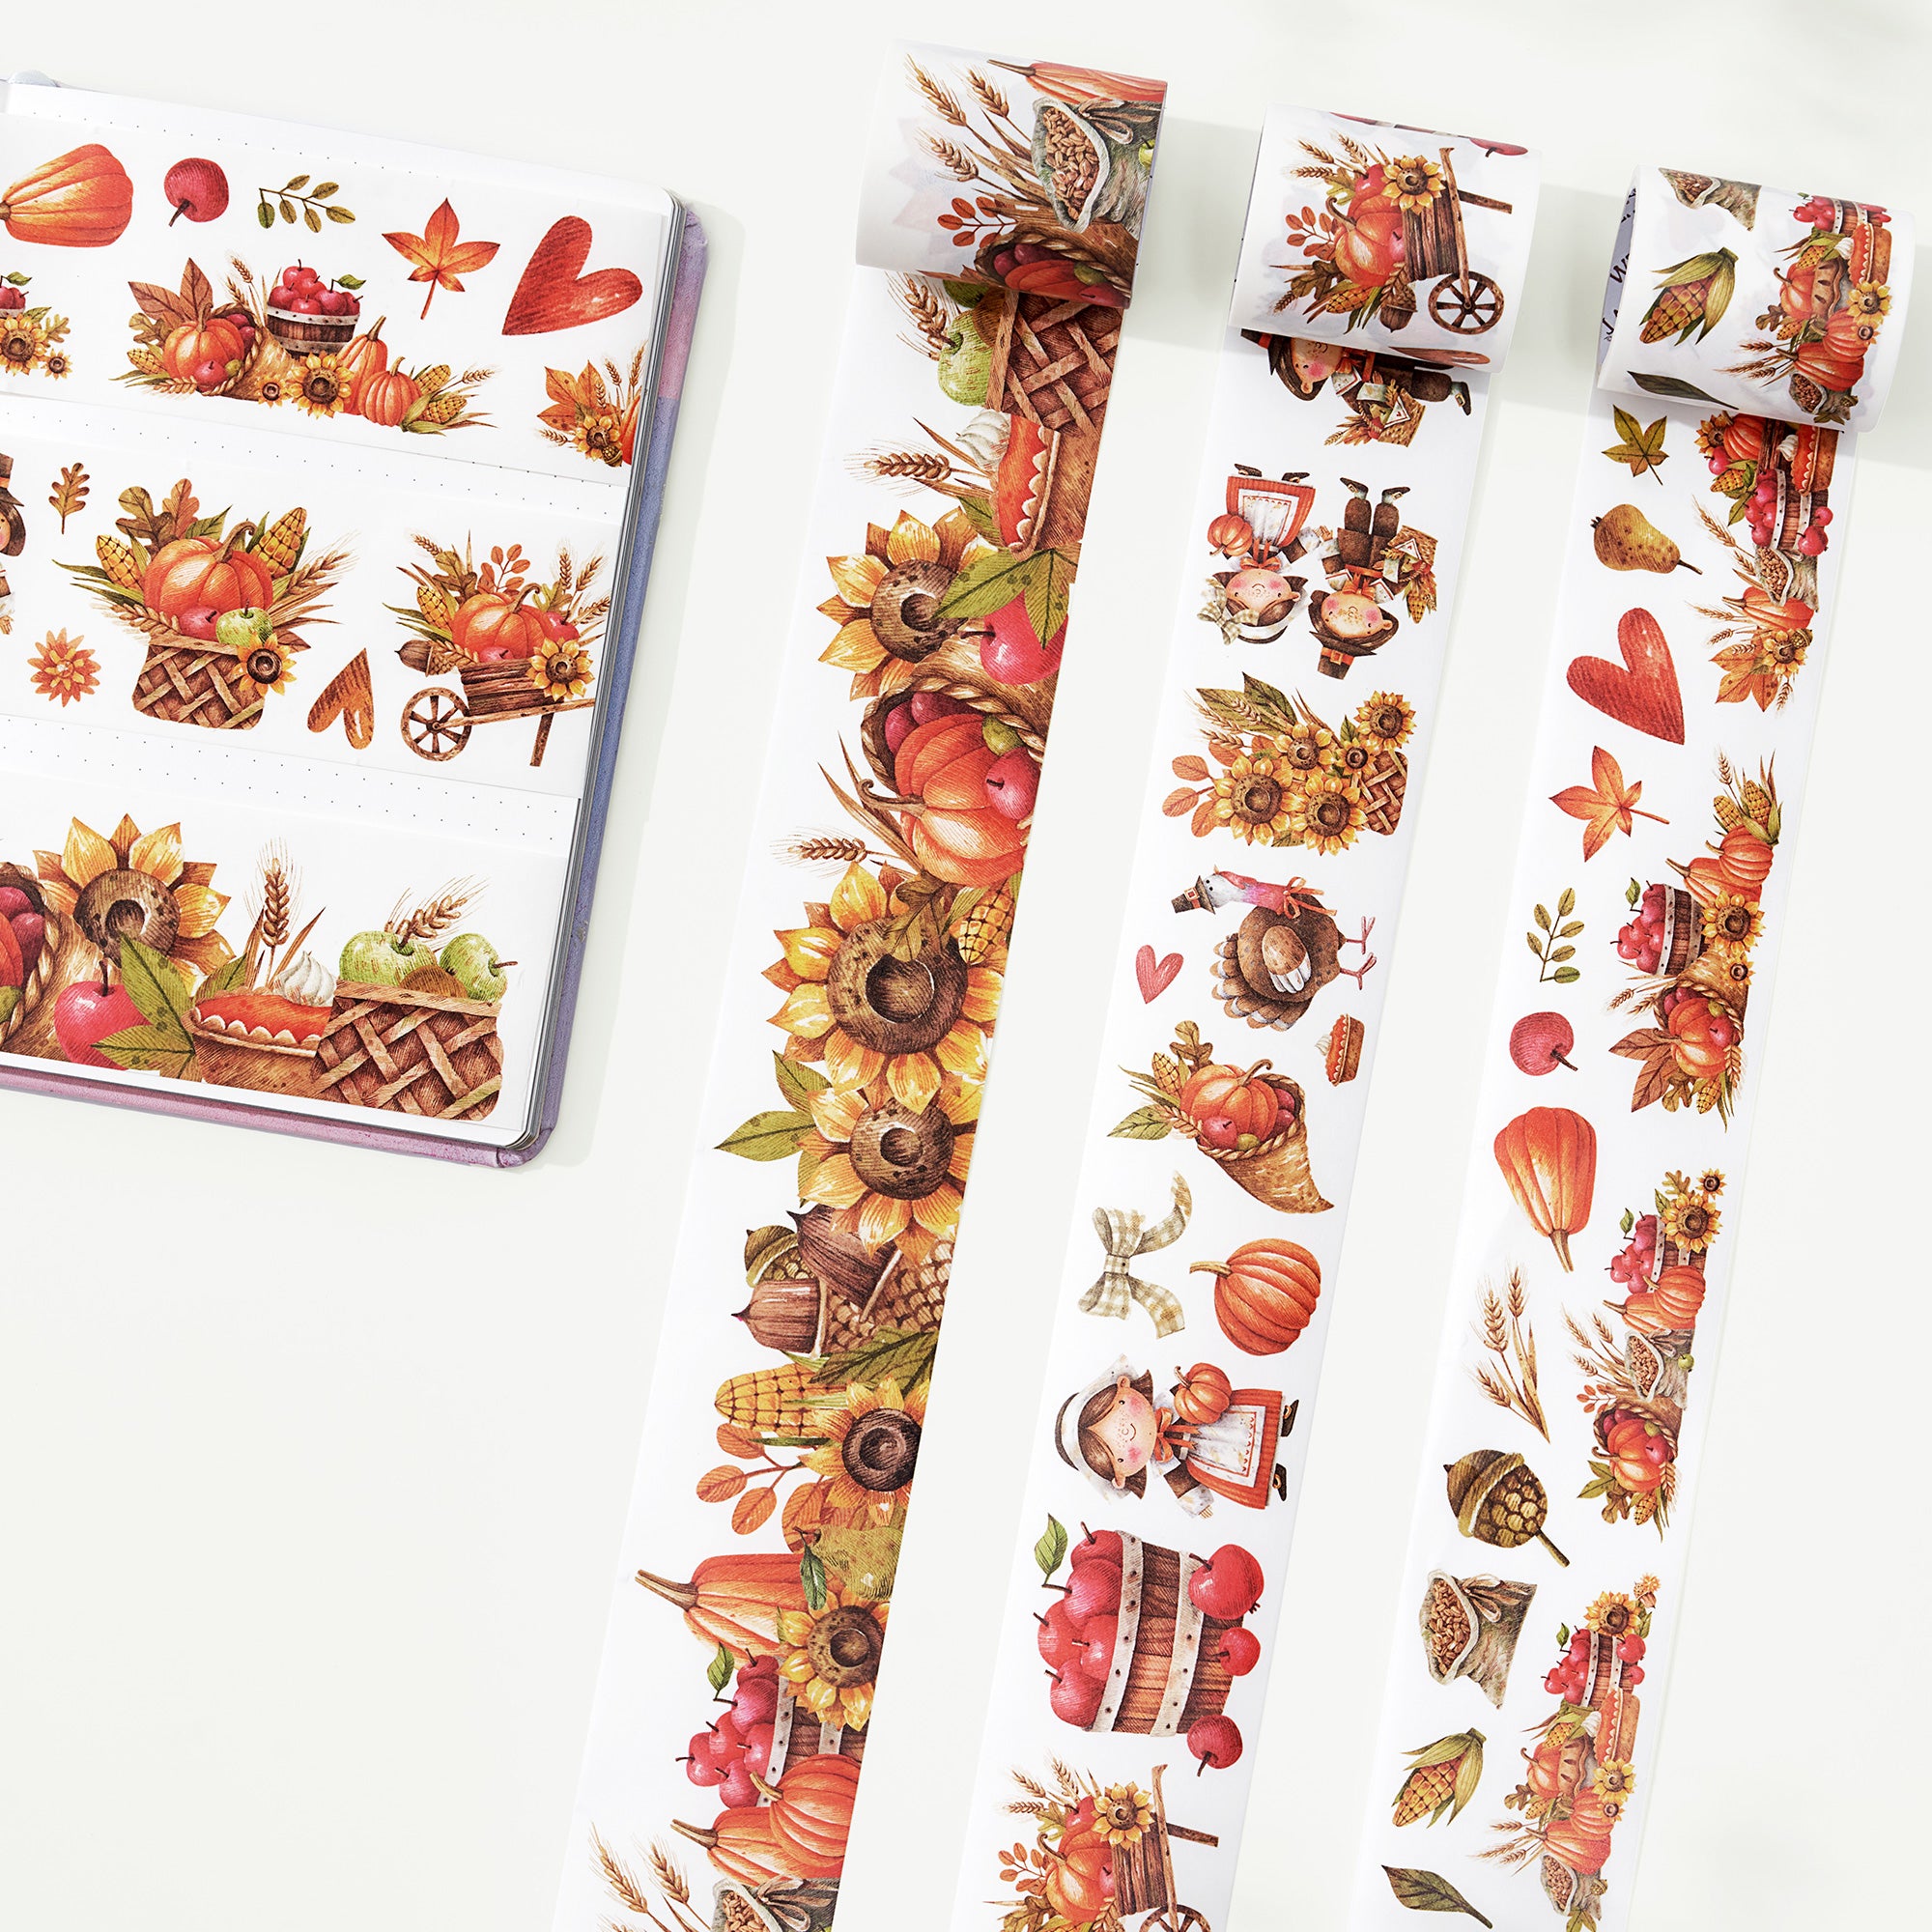 Gobble Galore Washi Tape Sticker Set | The Washi Tape Shop. Beautiful Washi and Decorative Tape For Bullet Journals, Gift Wrapping, Planner Decoration and DIY Projects